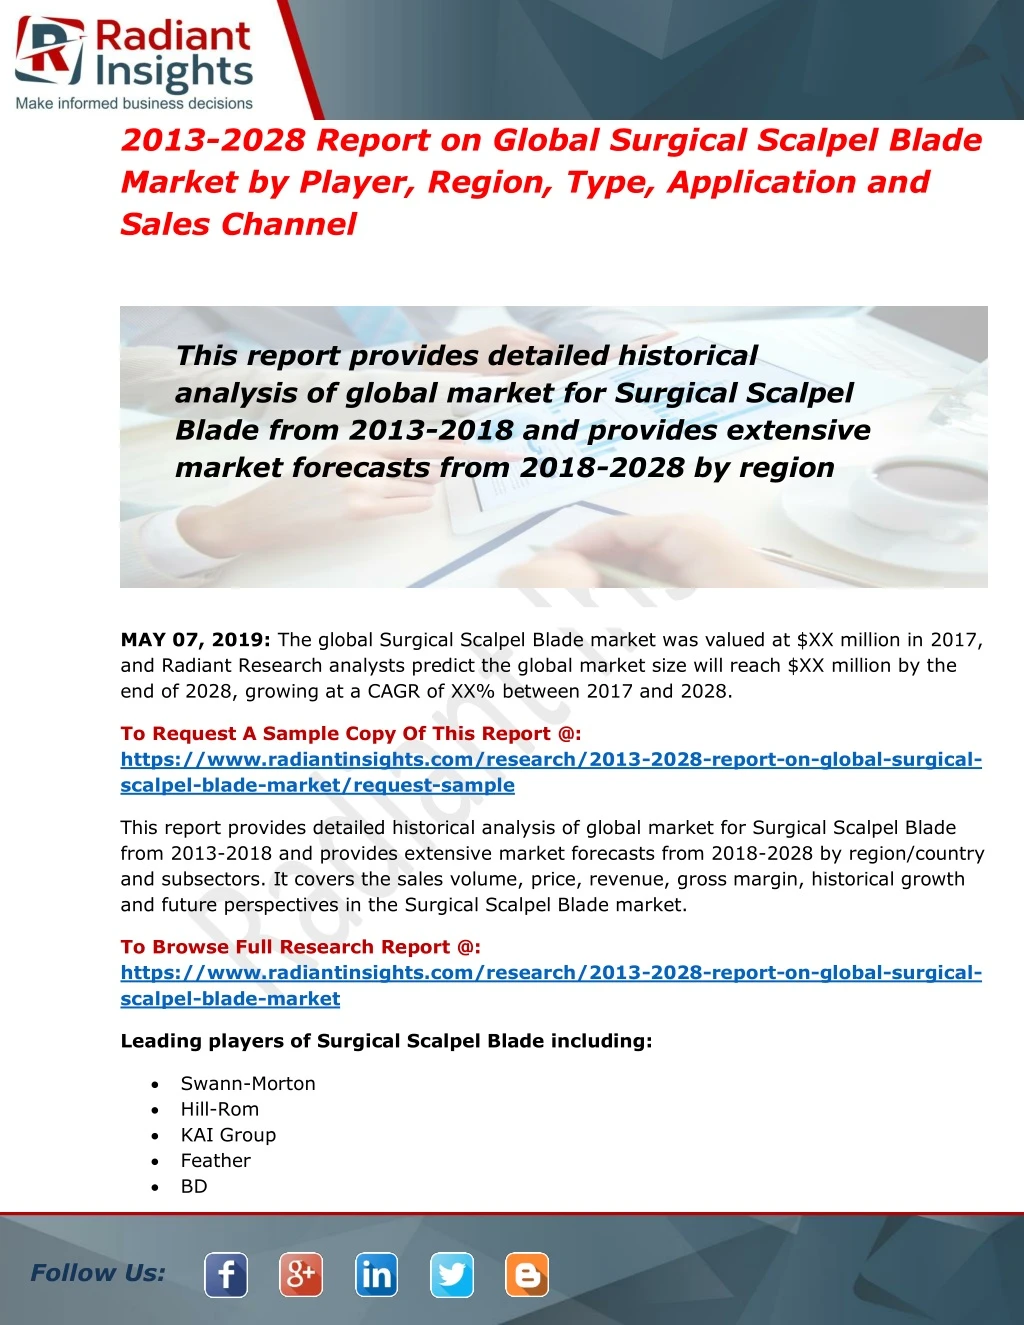 2013 2028 report on global surgical scalpel blade